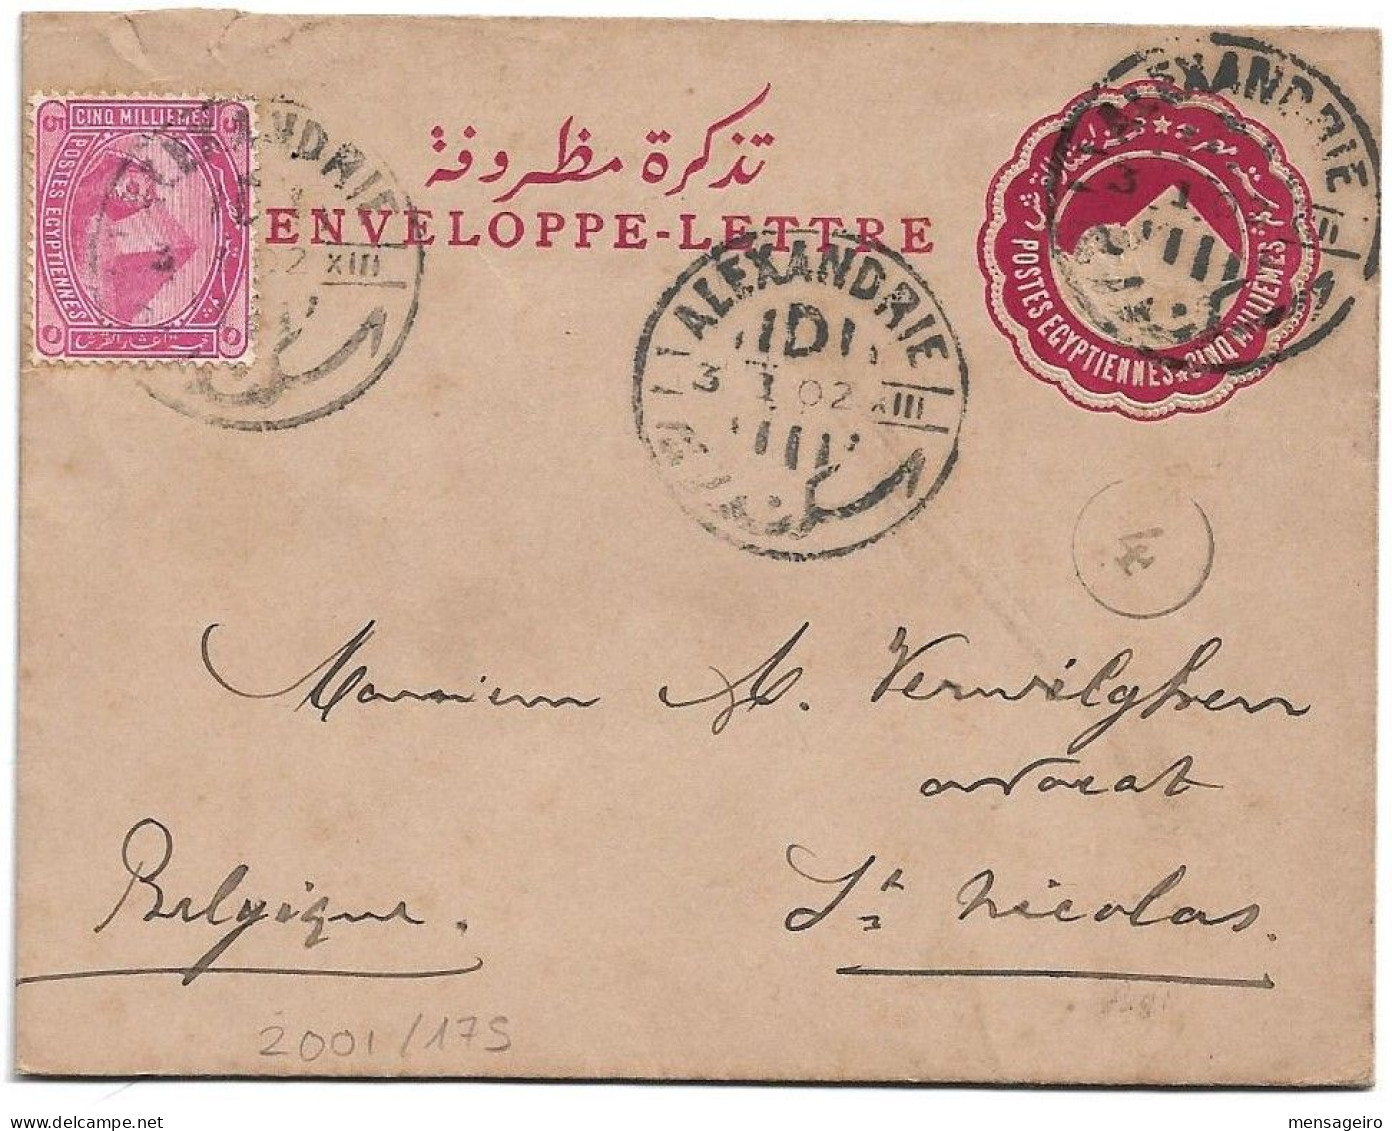 (C05) - 5M. LETTER SHEET STATIONNERY UPRATED BY 5M. STAMP ALEXANDRIE / D => BELGIUM 1902 - 1866-1914 Khedivate Of Egypt